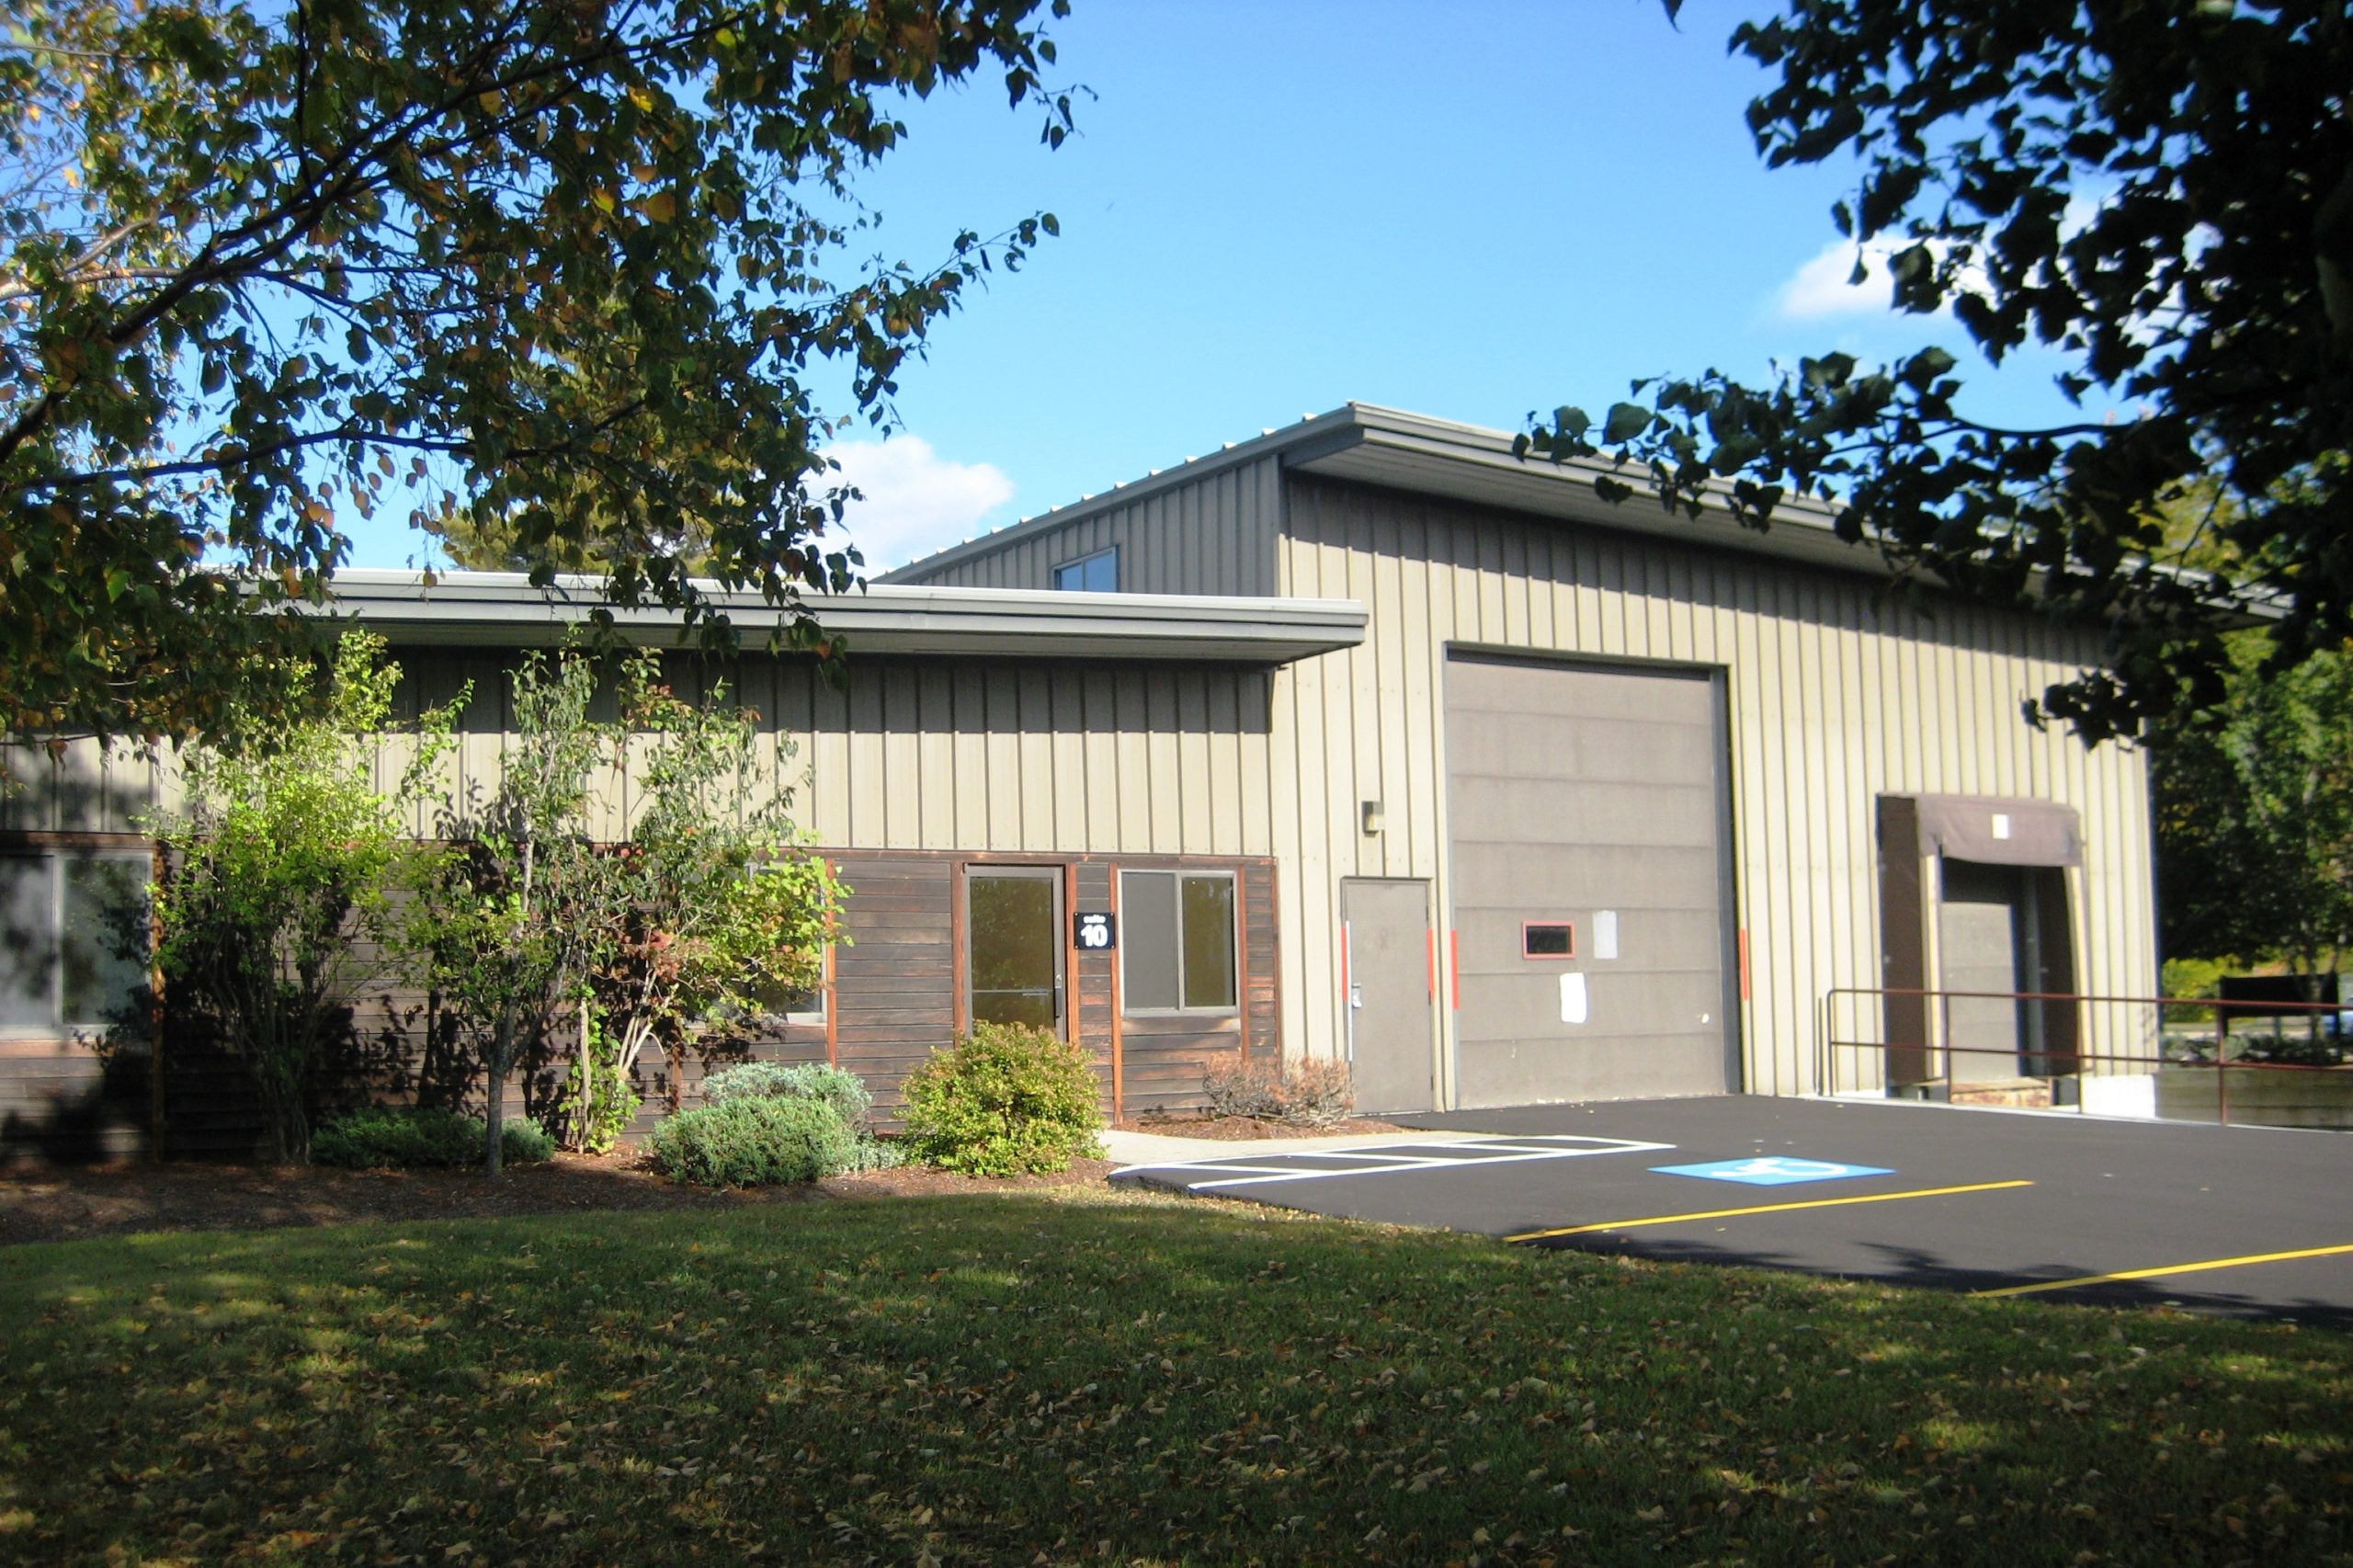 Exterior of building with garage and truck bay